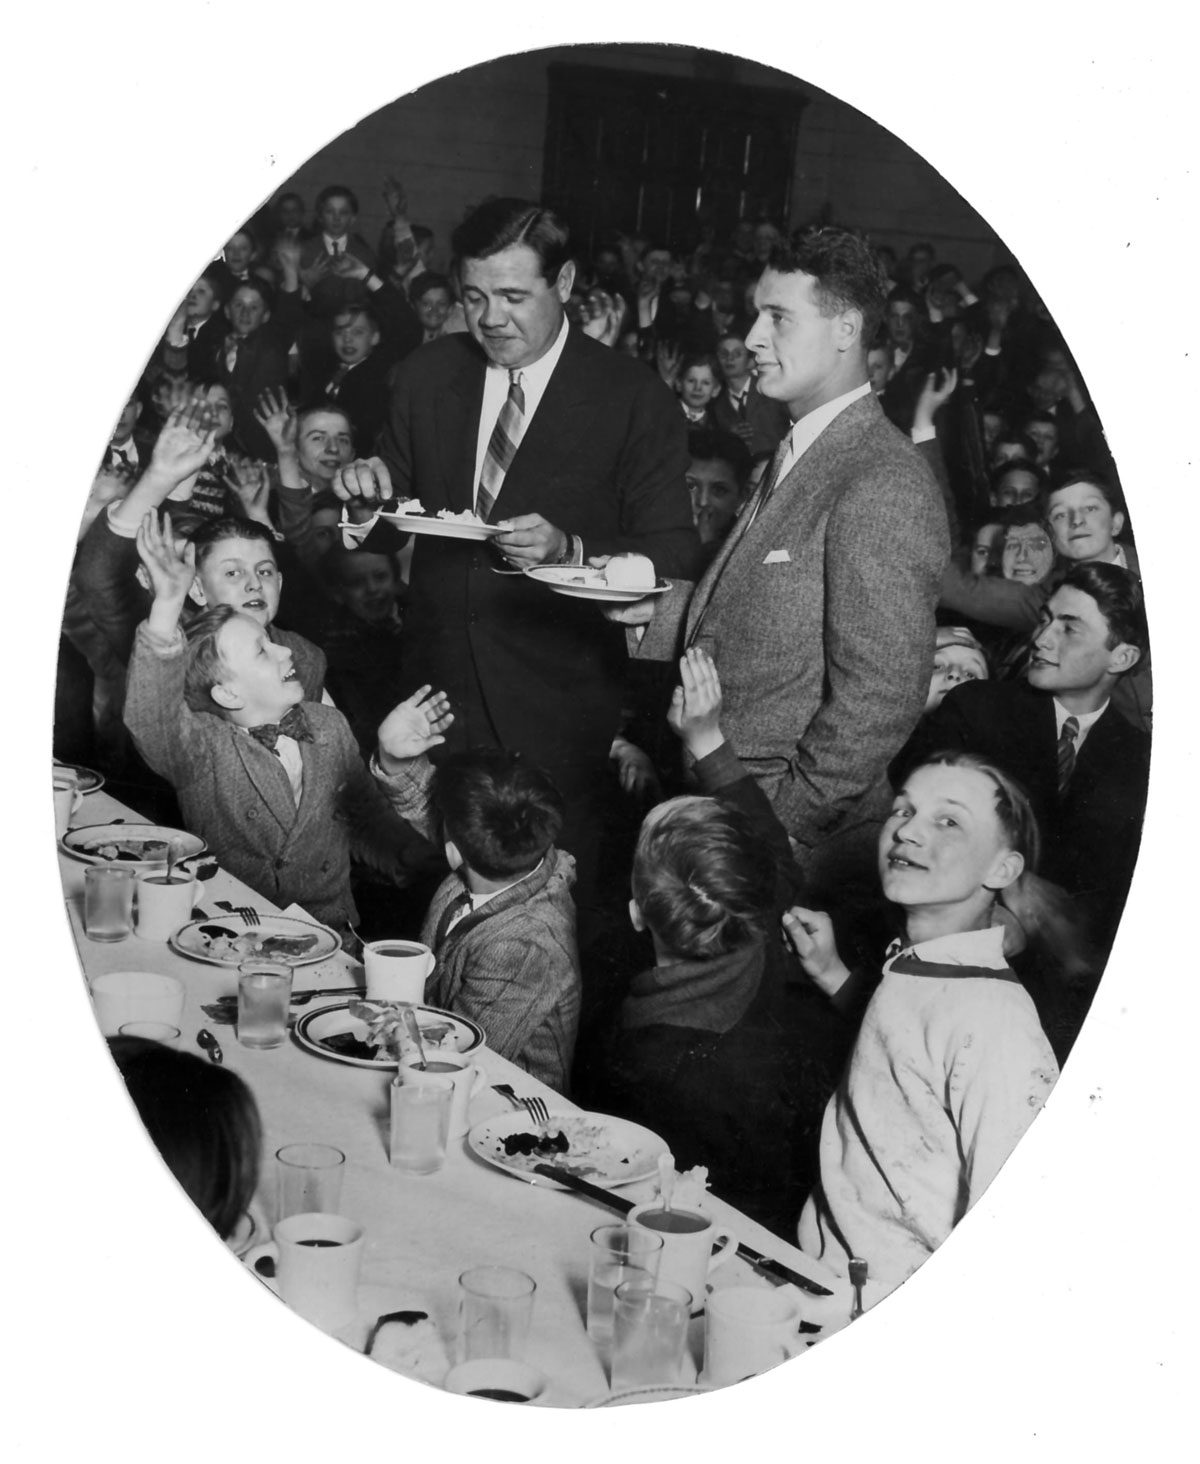 Union League Boys & Girls Club - 100th Anniversary - Our Archives - Famous People - Babe Ruth - Lou Gherig